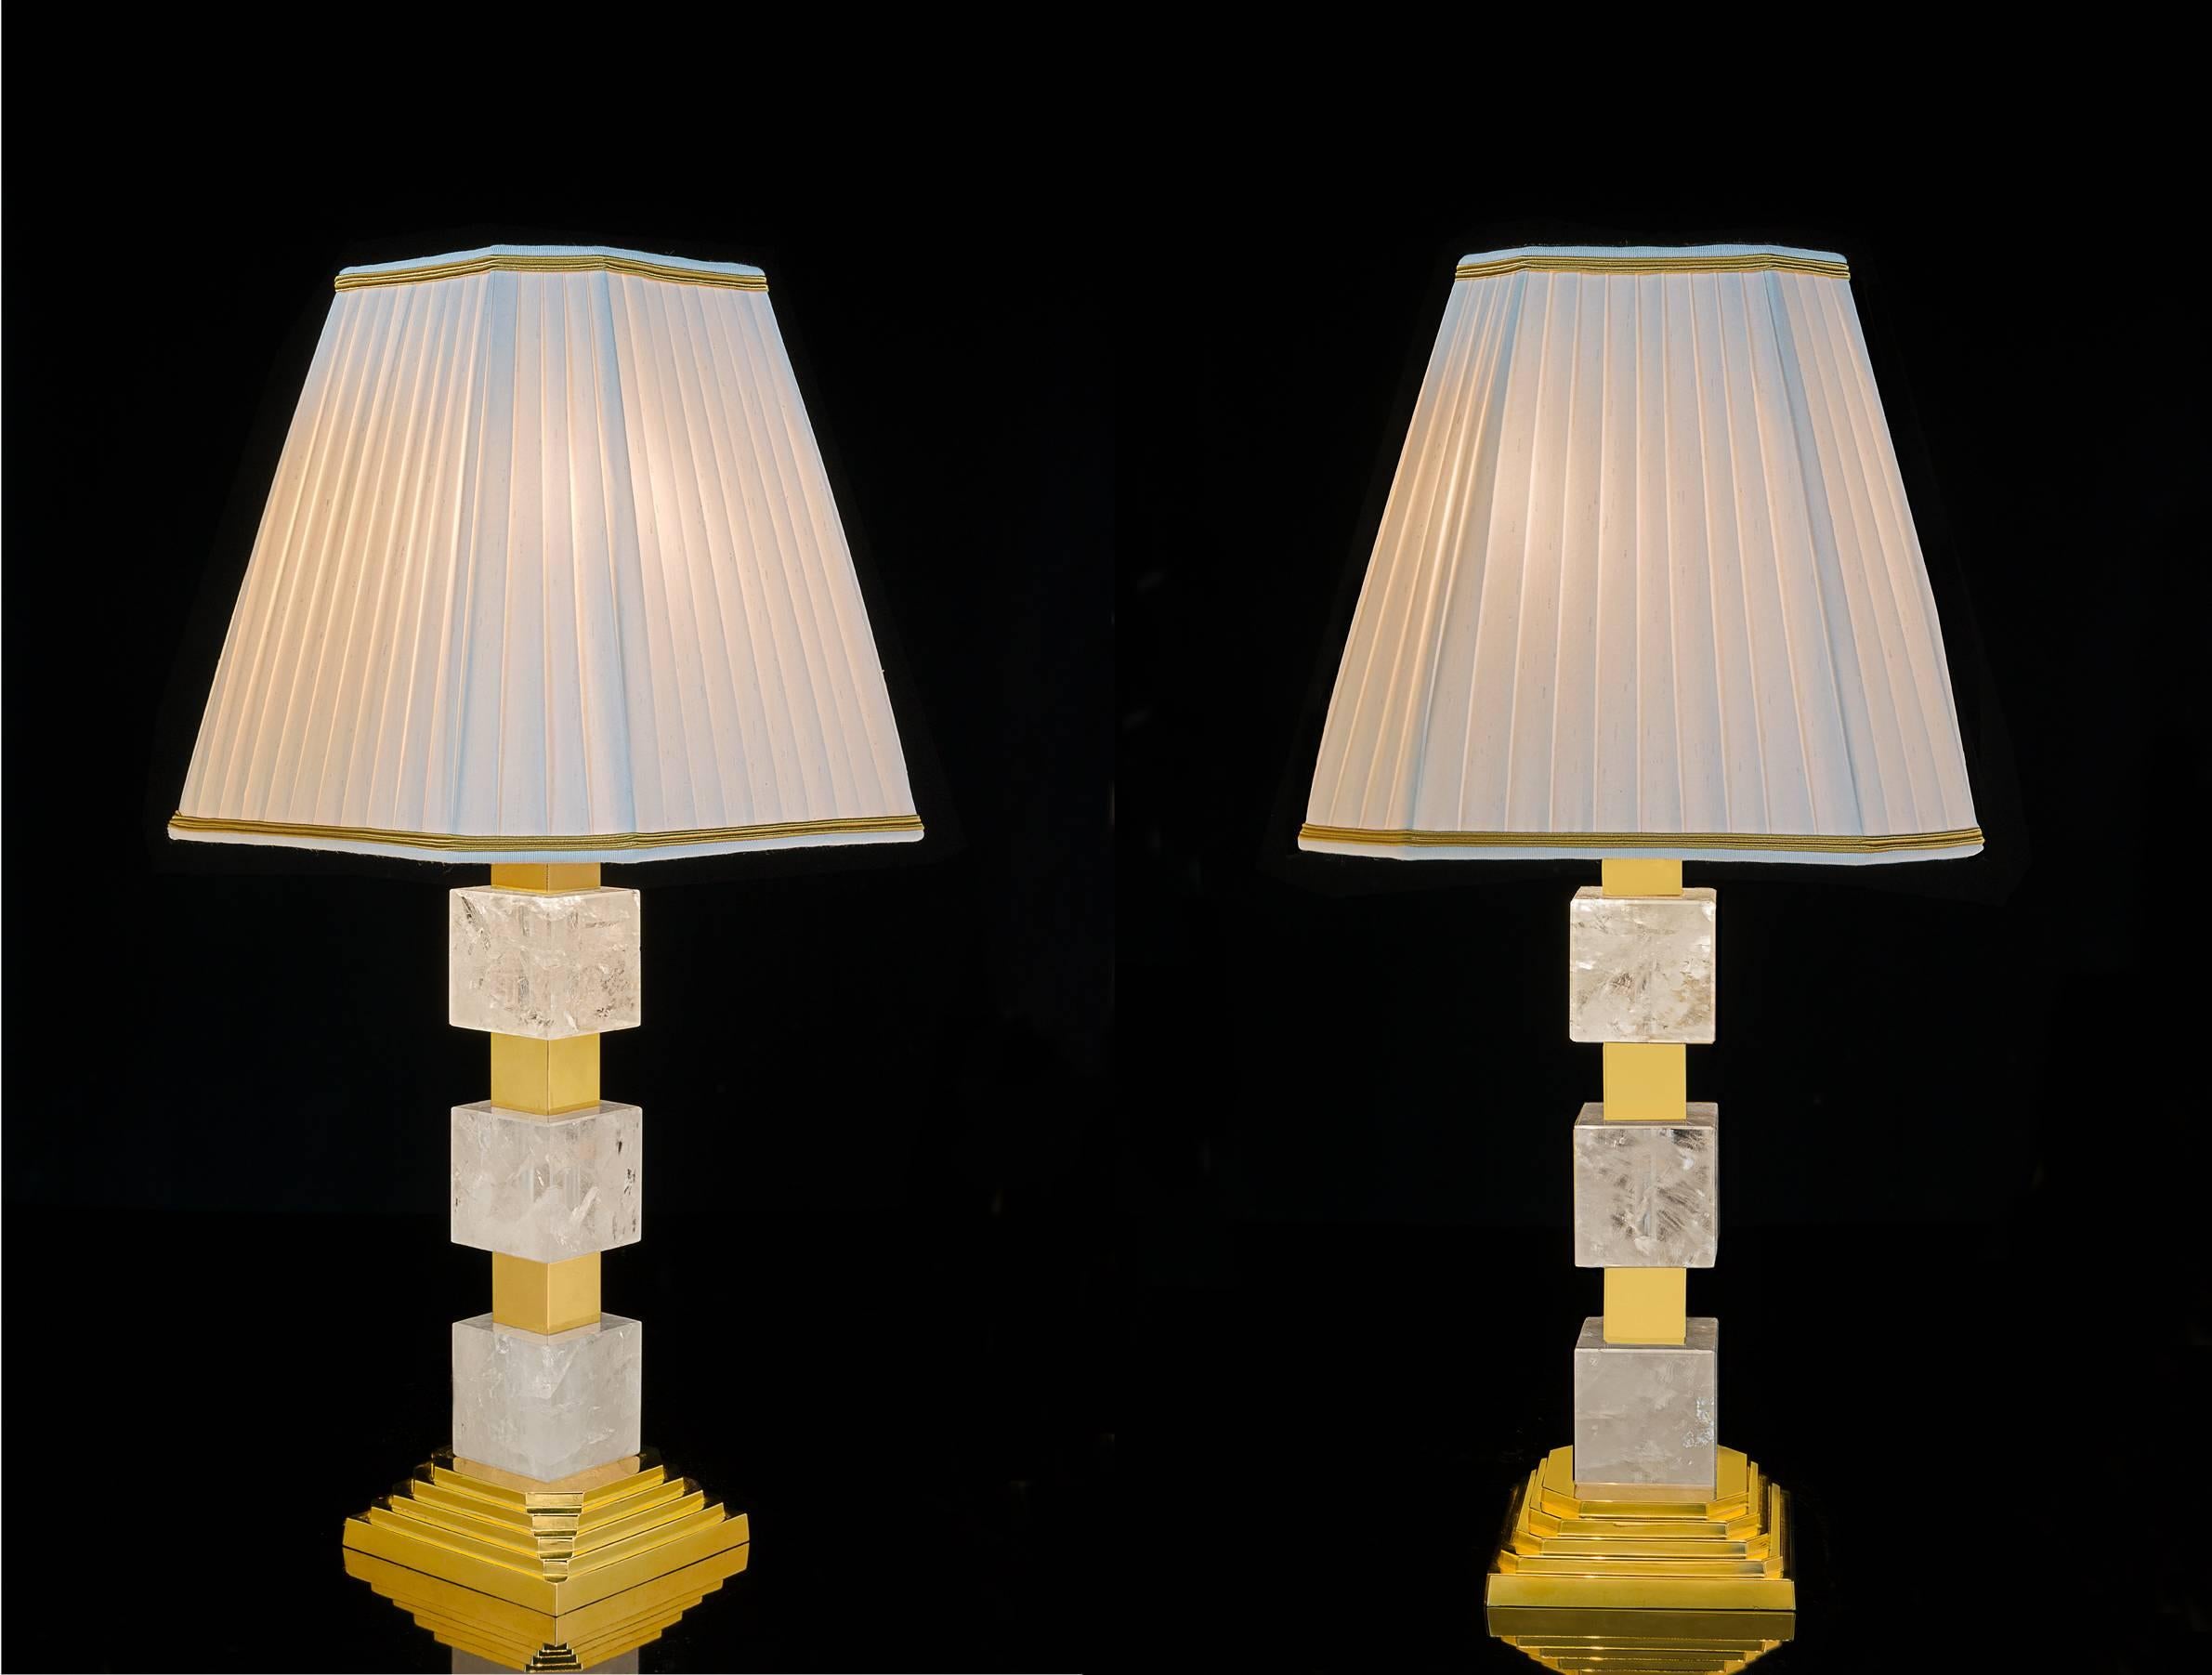 Rock crystal quartz Art Deco style pair of lamps made by Alexandre Vossion.
Gold edition also could be available in silver by request.
Dimension: 5.9 X 5.9 inches for the base
15.75 inches high under the lamp shades/27.5 with the shades.
The shades